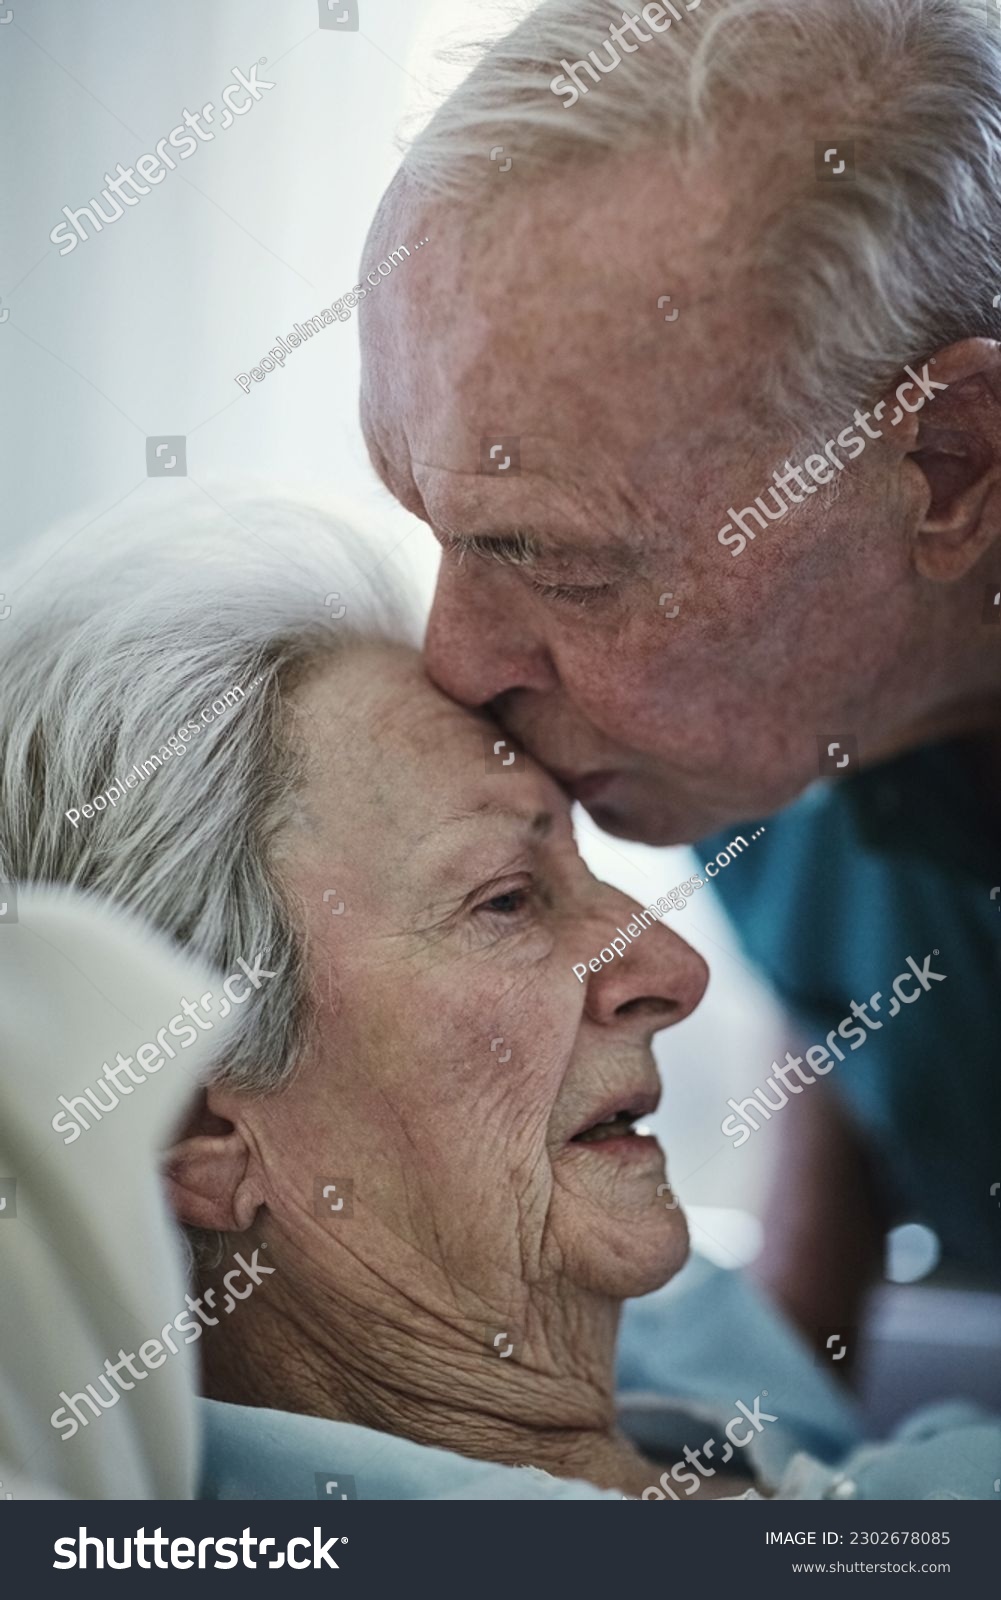 Senior, kiss and couple in hospital for love, visiting sick cancer patient and hope for recovery. Clinic, elderly man and woman kissing on forehead for empathy, kindness and support for healthcare. #2302678085